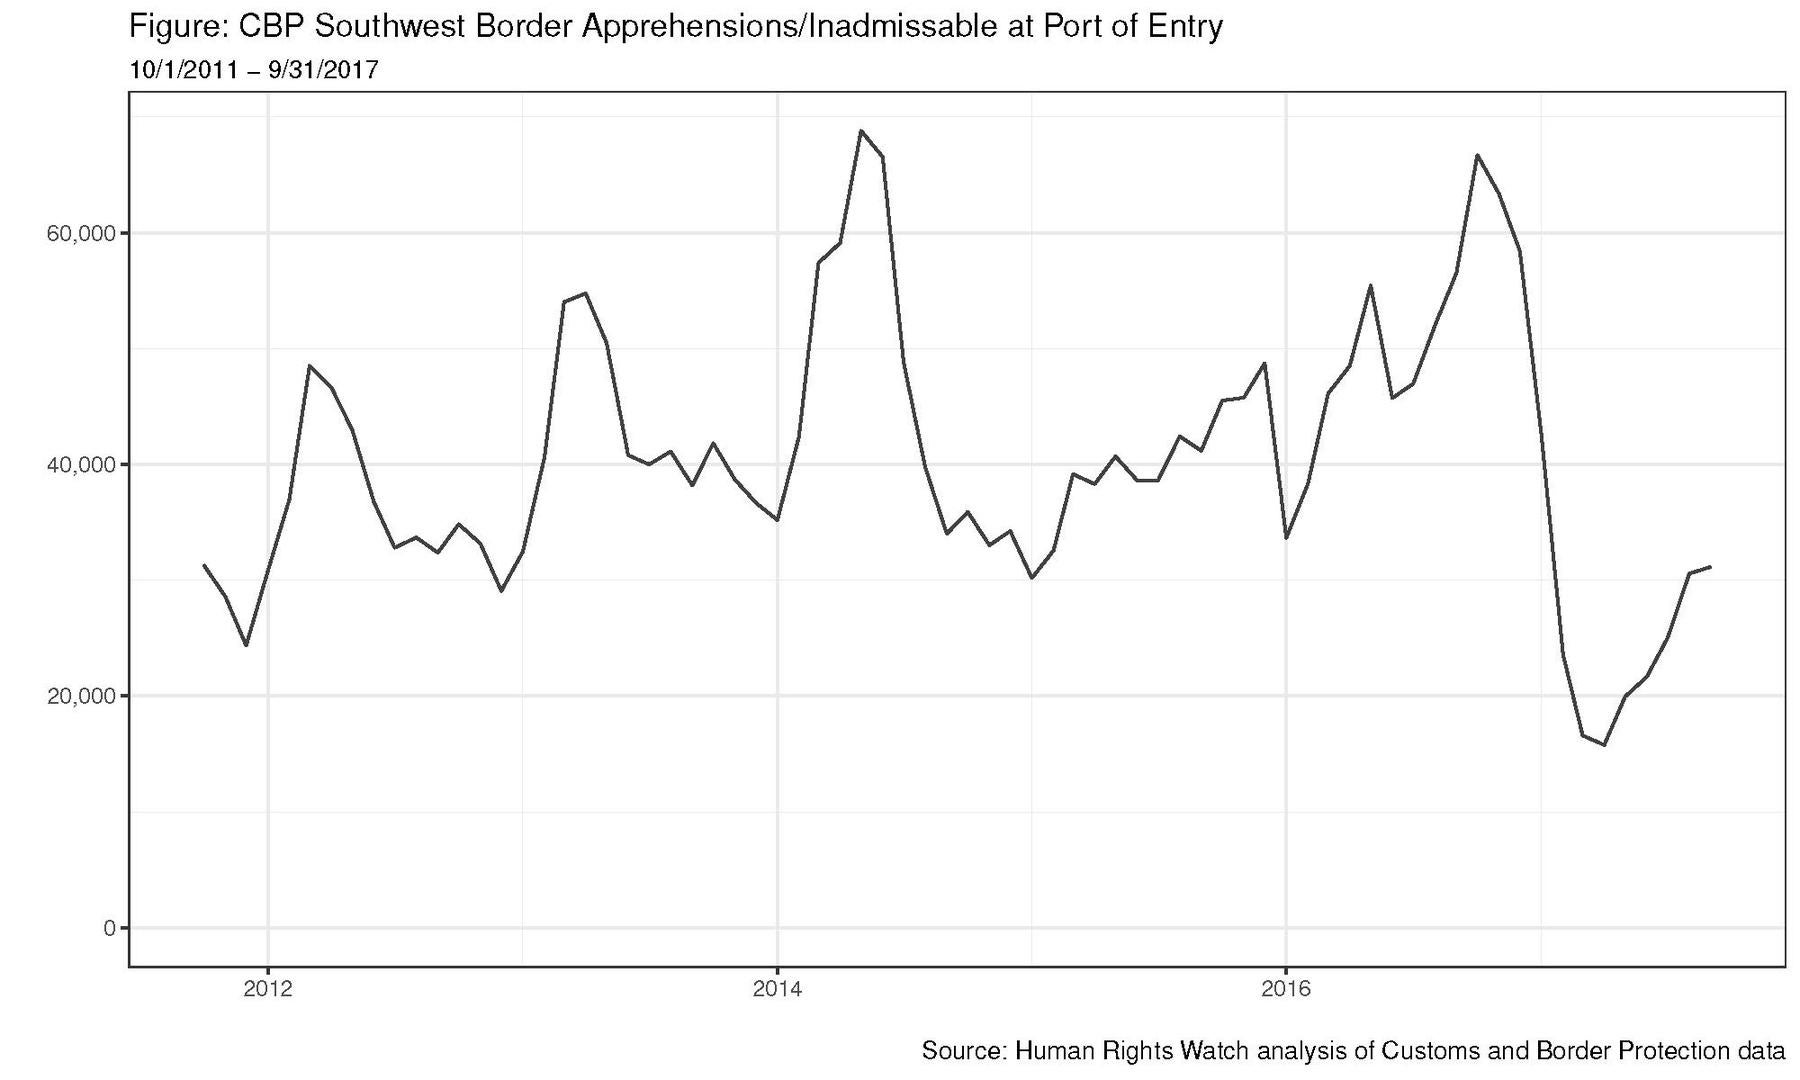 CBP Southwest Border Apprehensions/Inadmissible at Port of Entry.